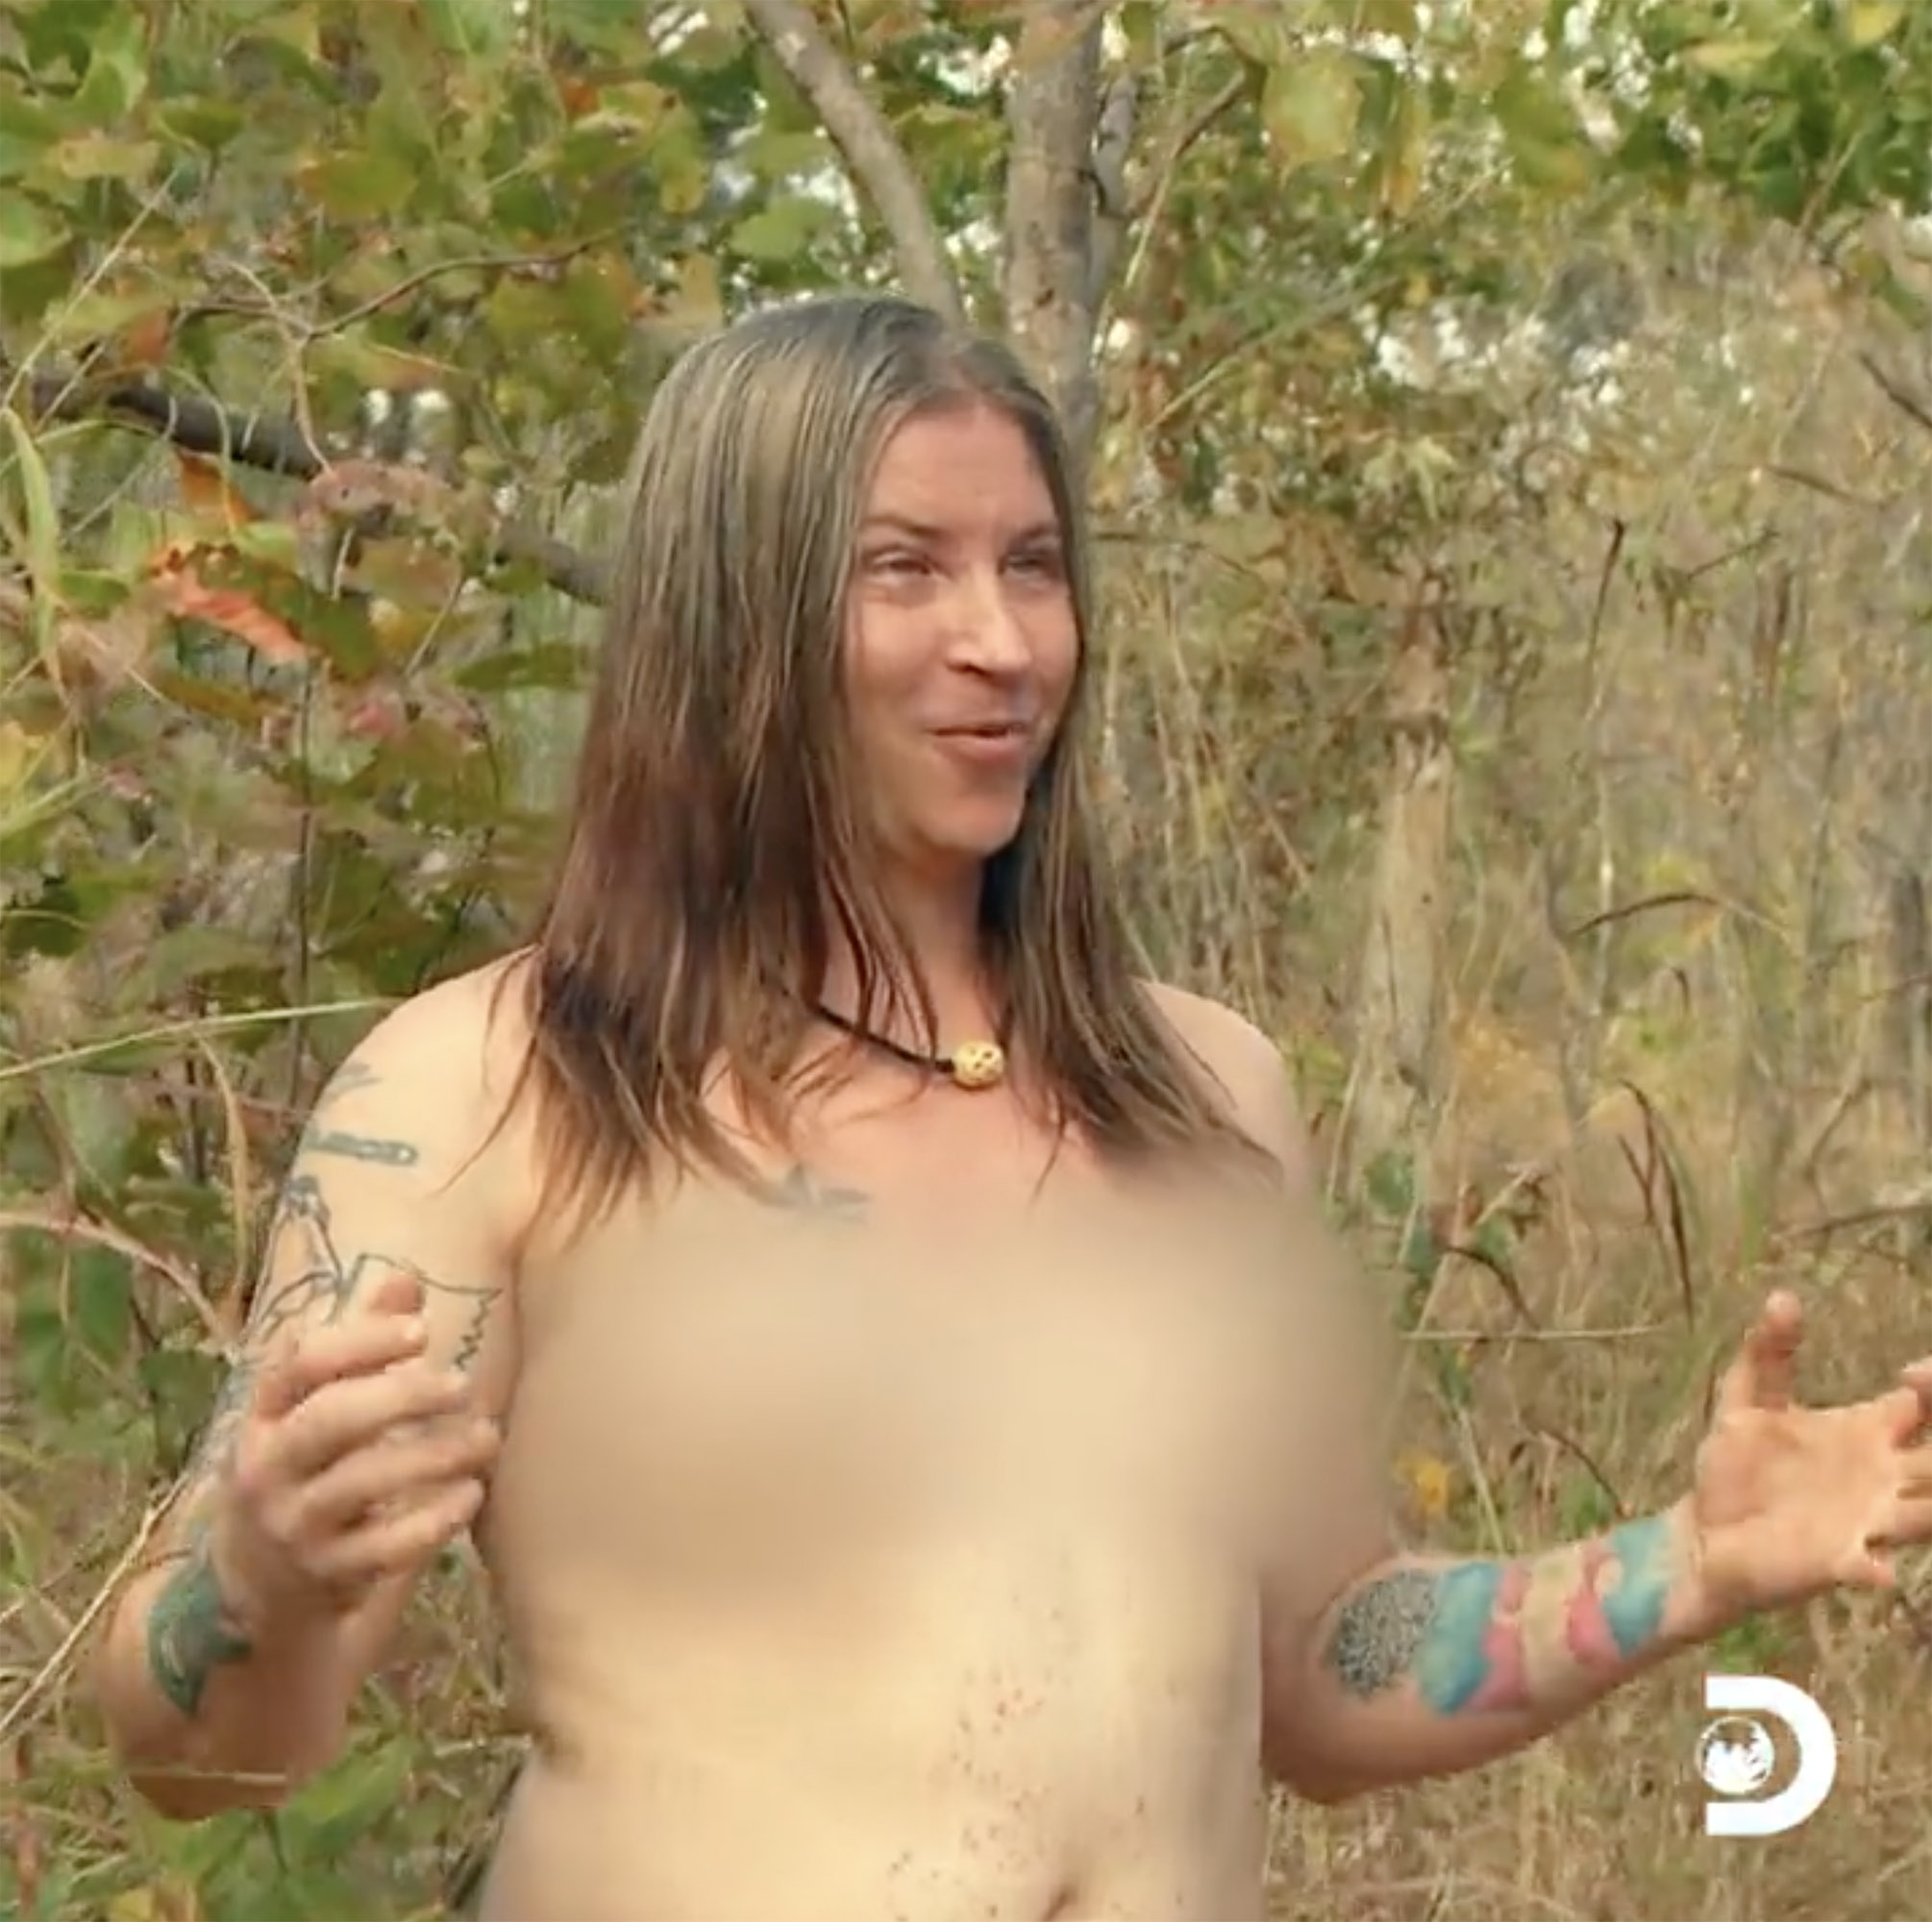 adante patrick share naked and afraid pussy shot photos